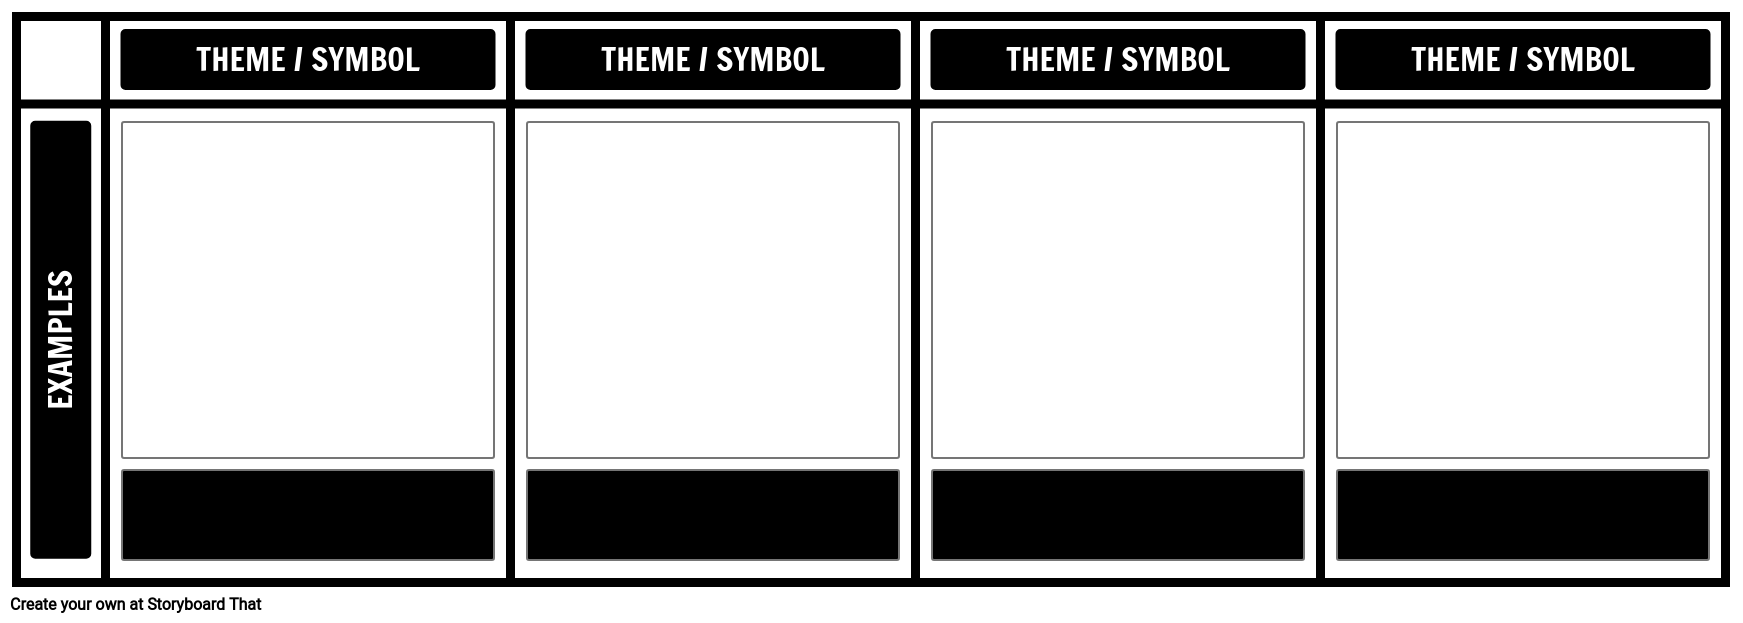 Themes, Symbols, and Motifs Template